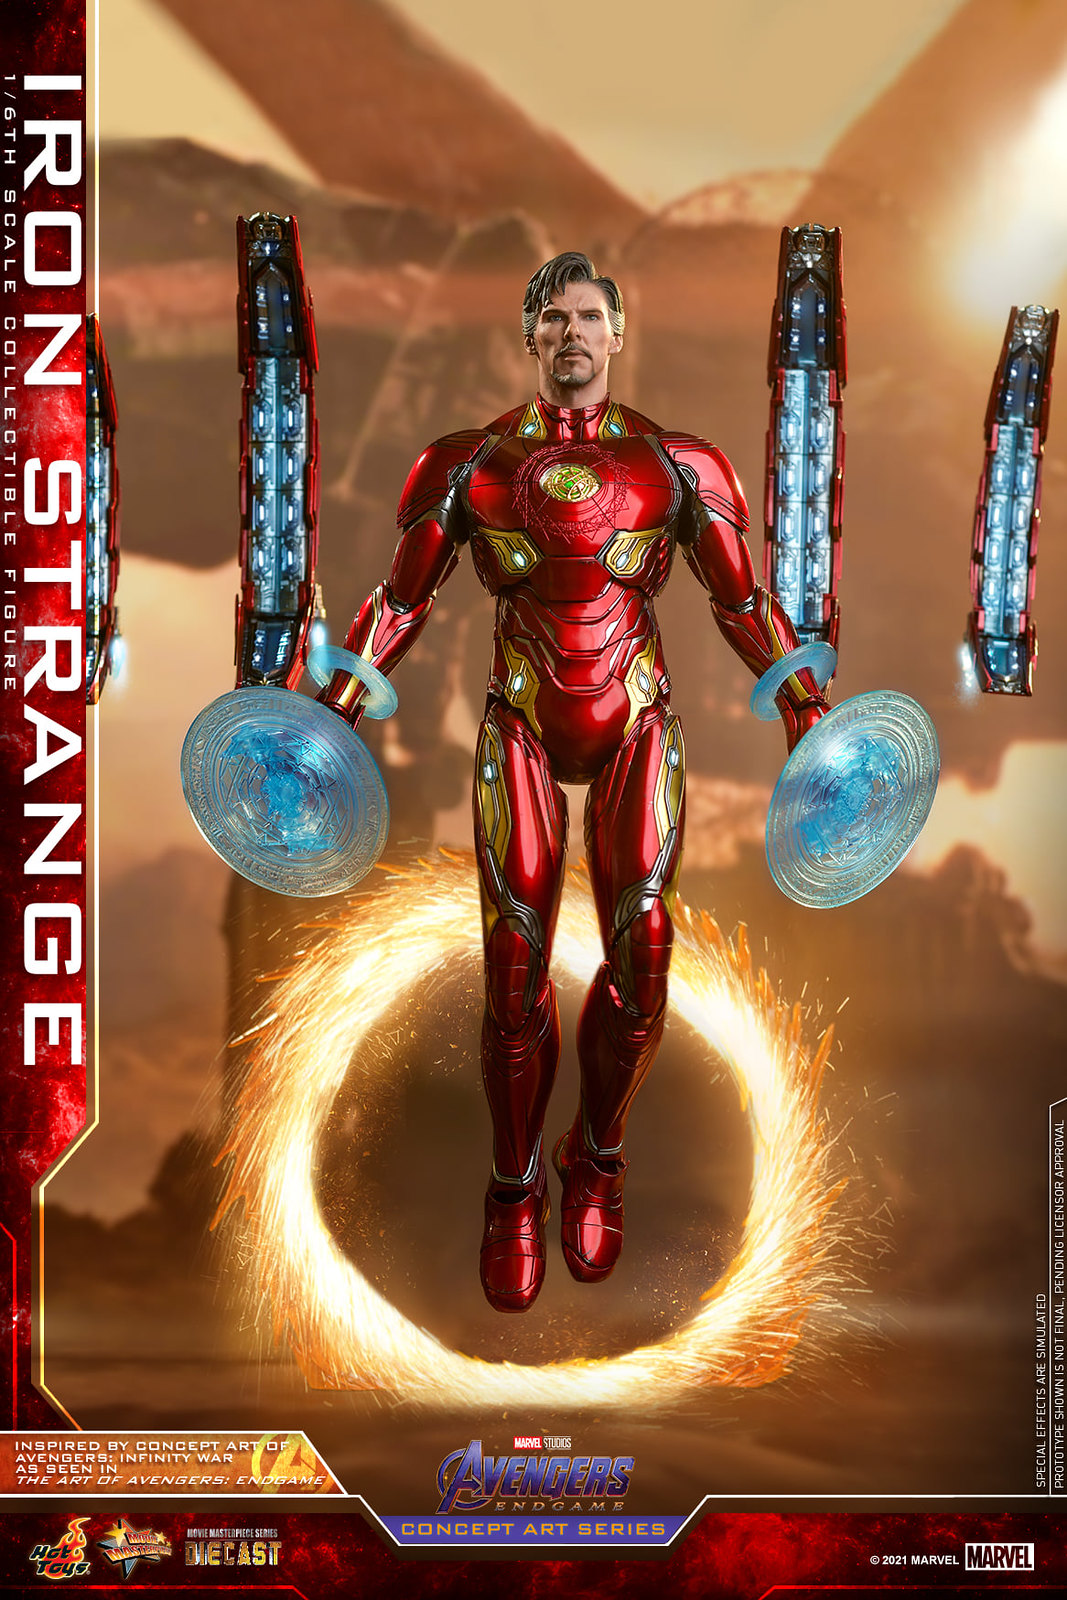 NEW PRODUCT: Hot Toys Avengers: Endgame (Concept Art Series) - 1/6th scale Iron Strange Collectible Figure 51311229891_a806b112f5_h